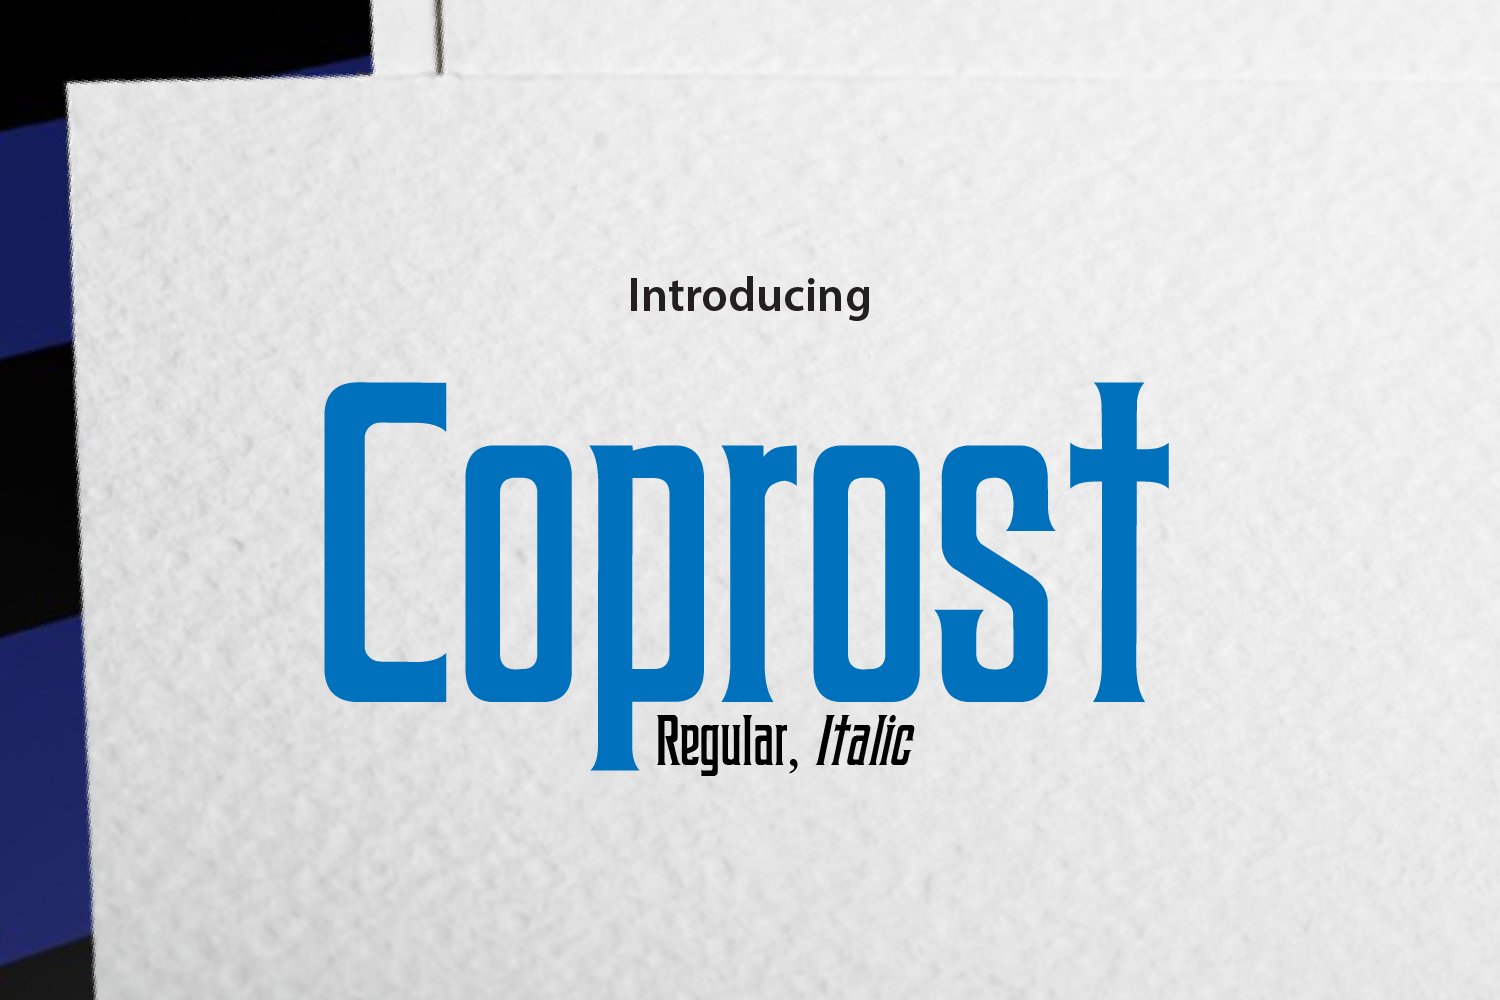 Coprost cover image.